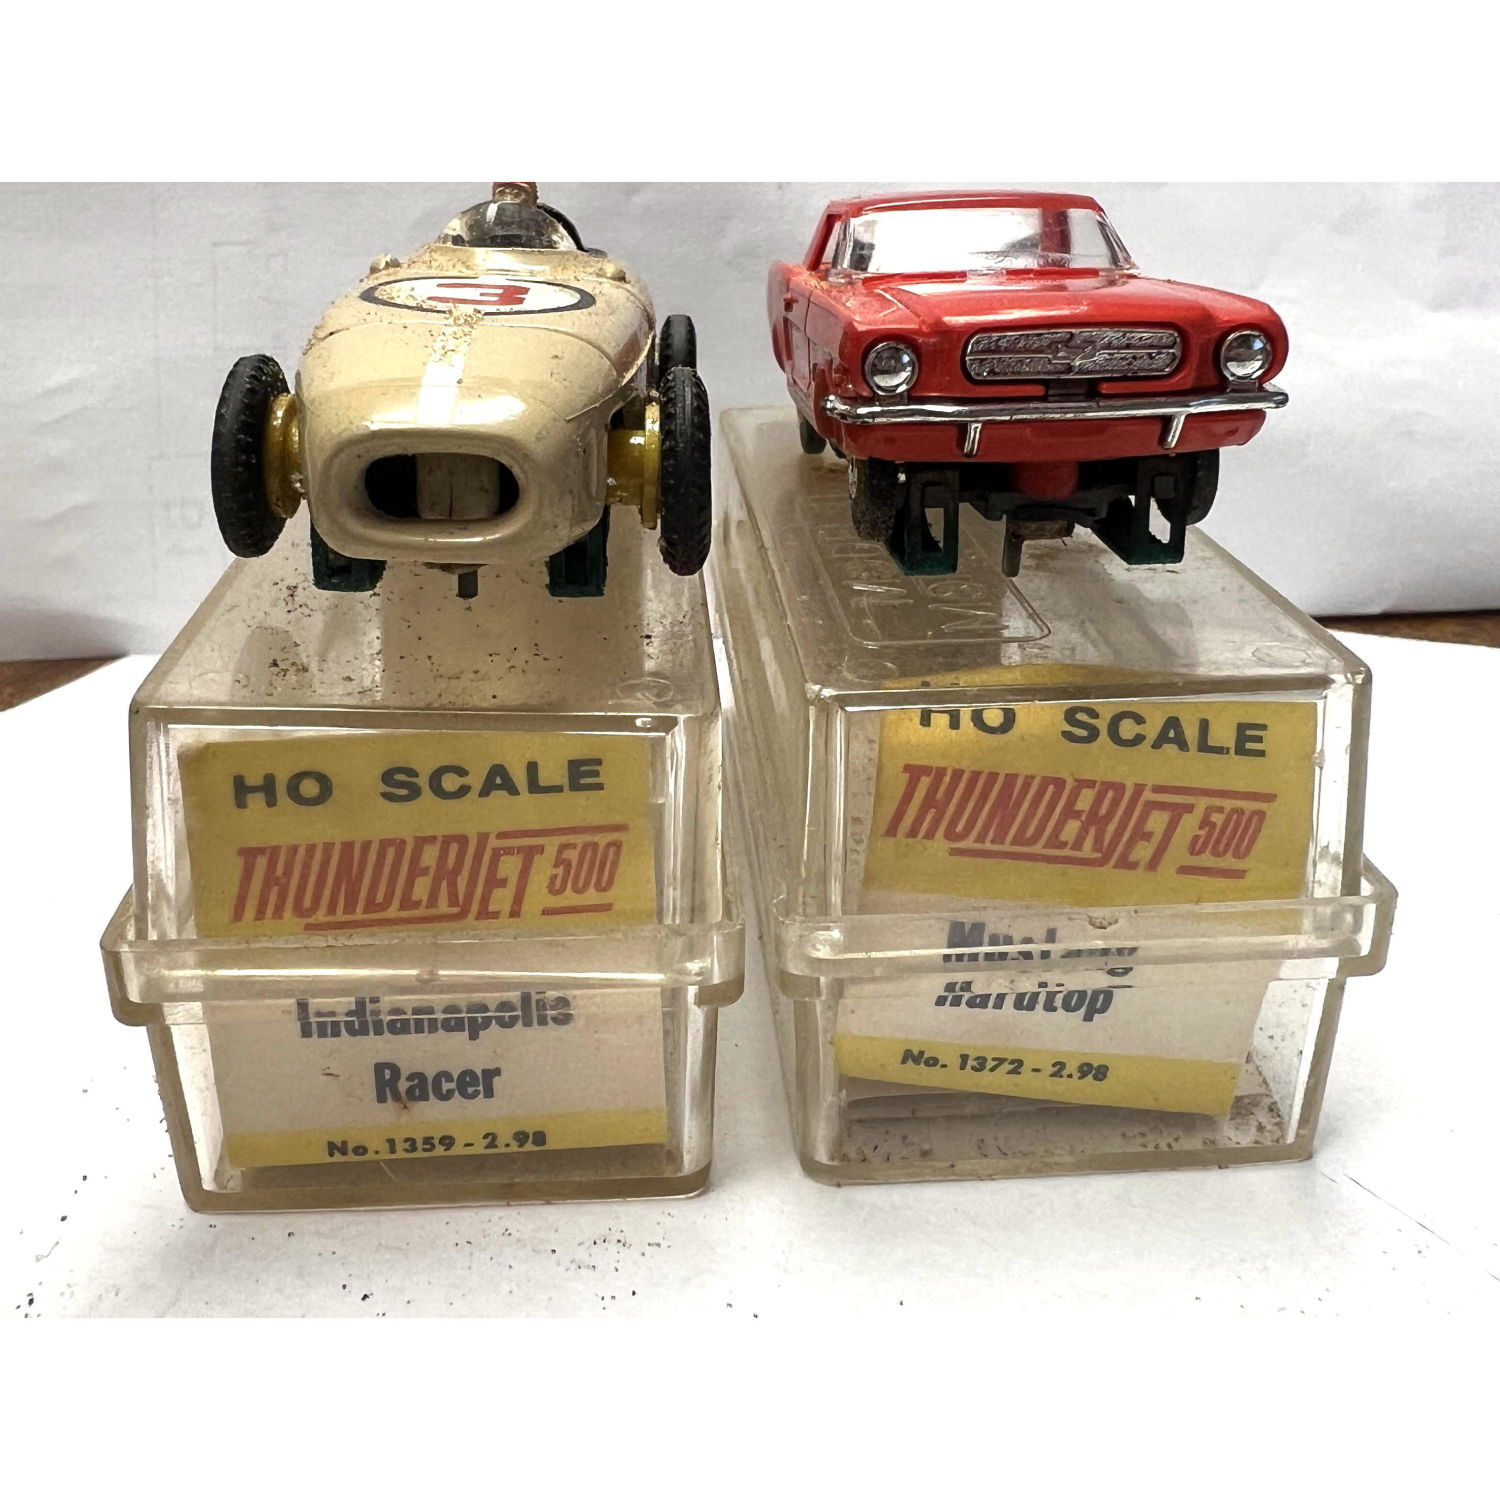 2 slot cars 1359 Indianapolis racer  2ff6dc